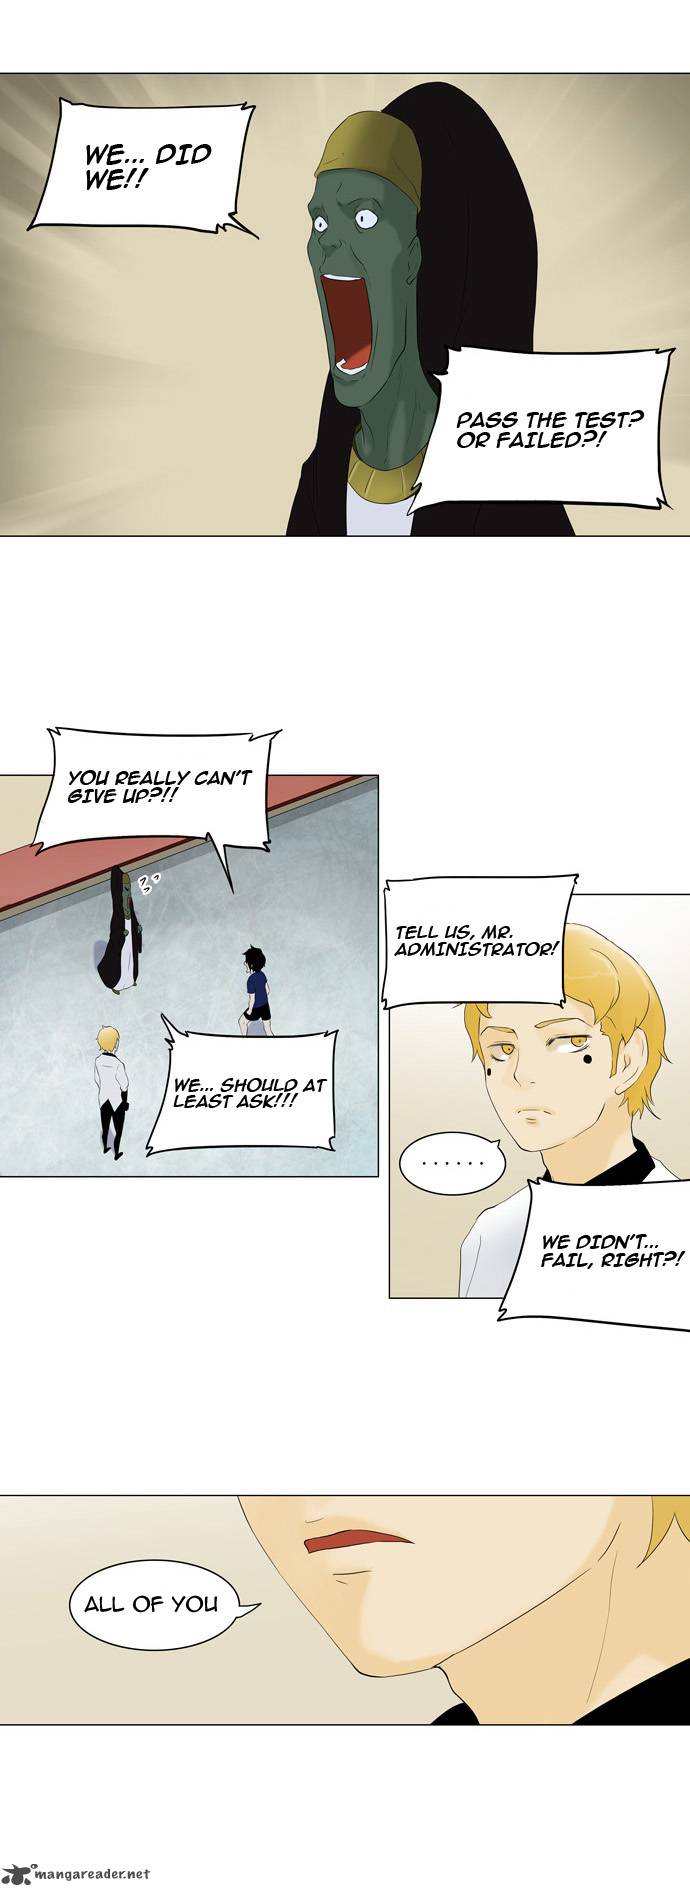 Tower Of God 75 19